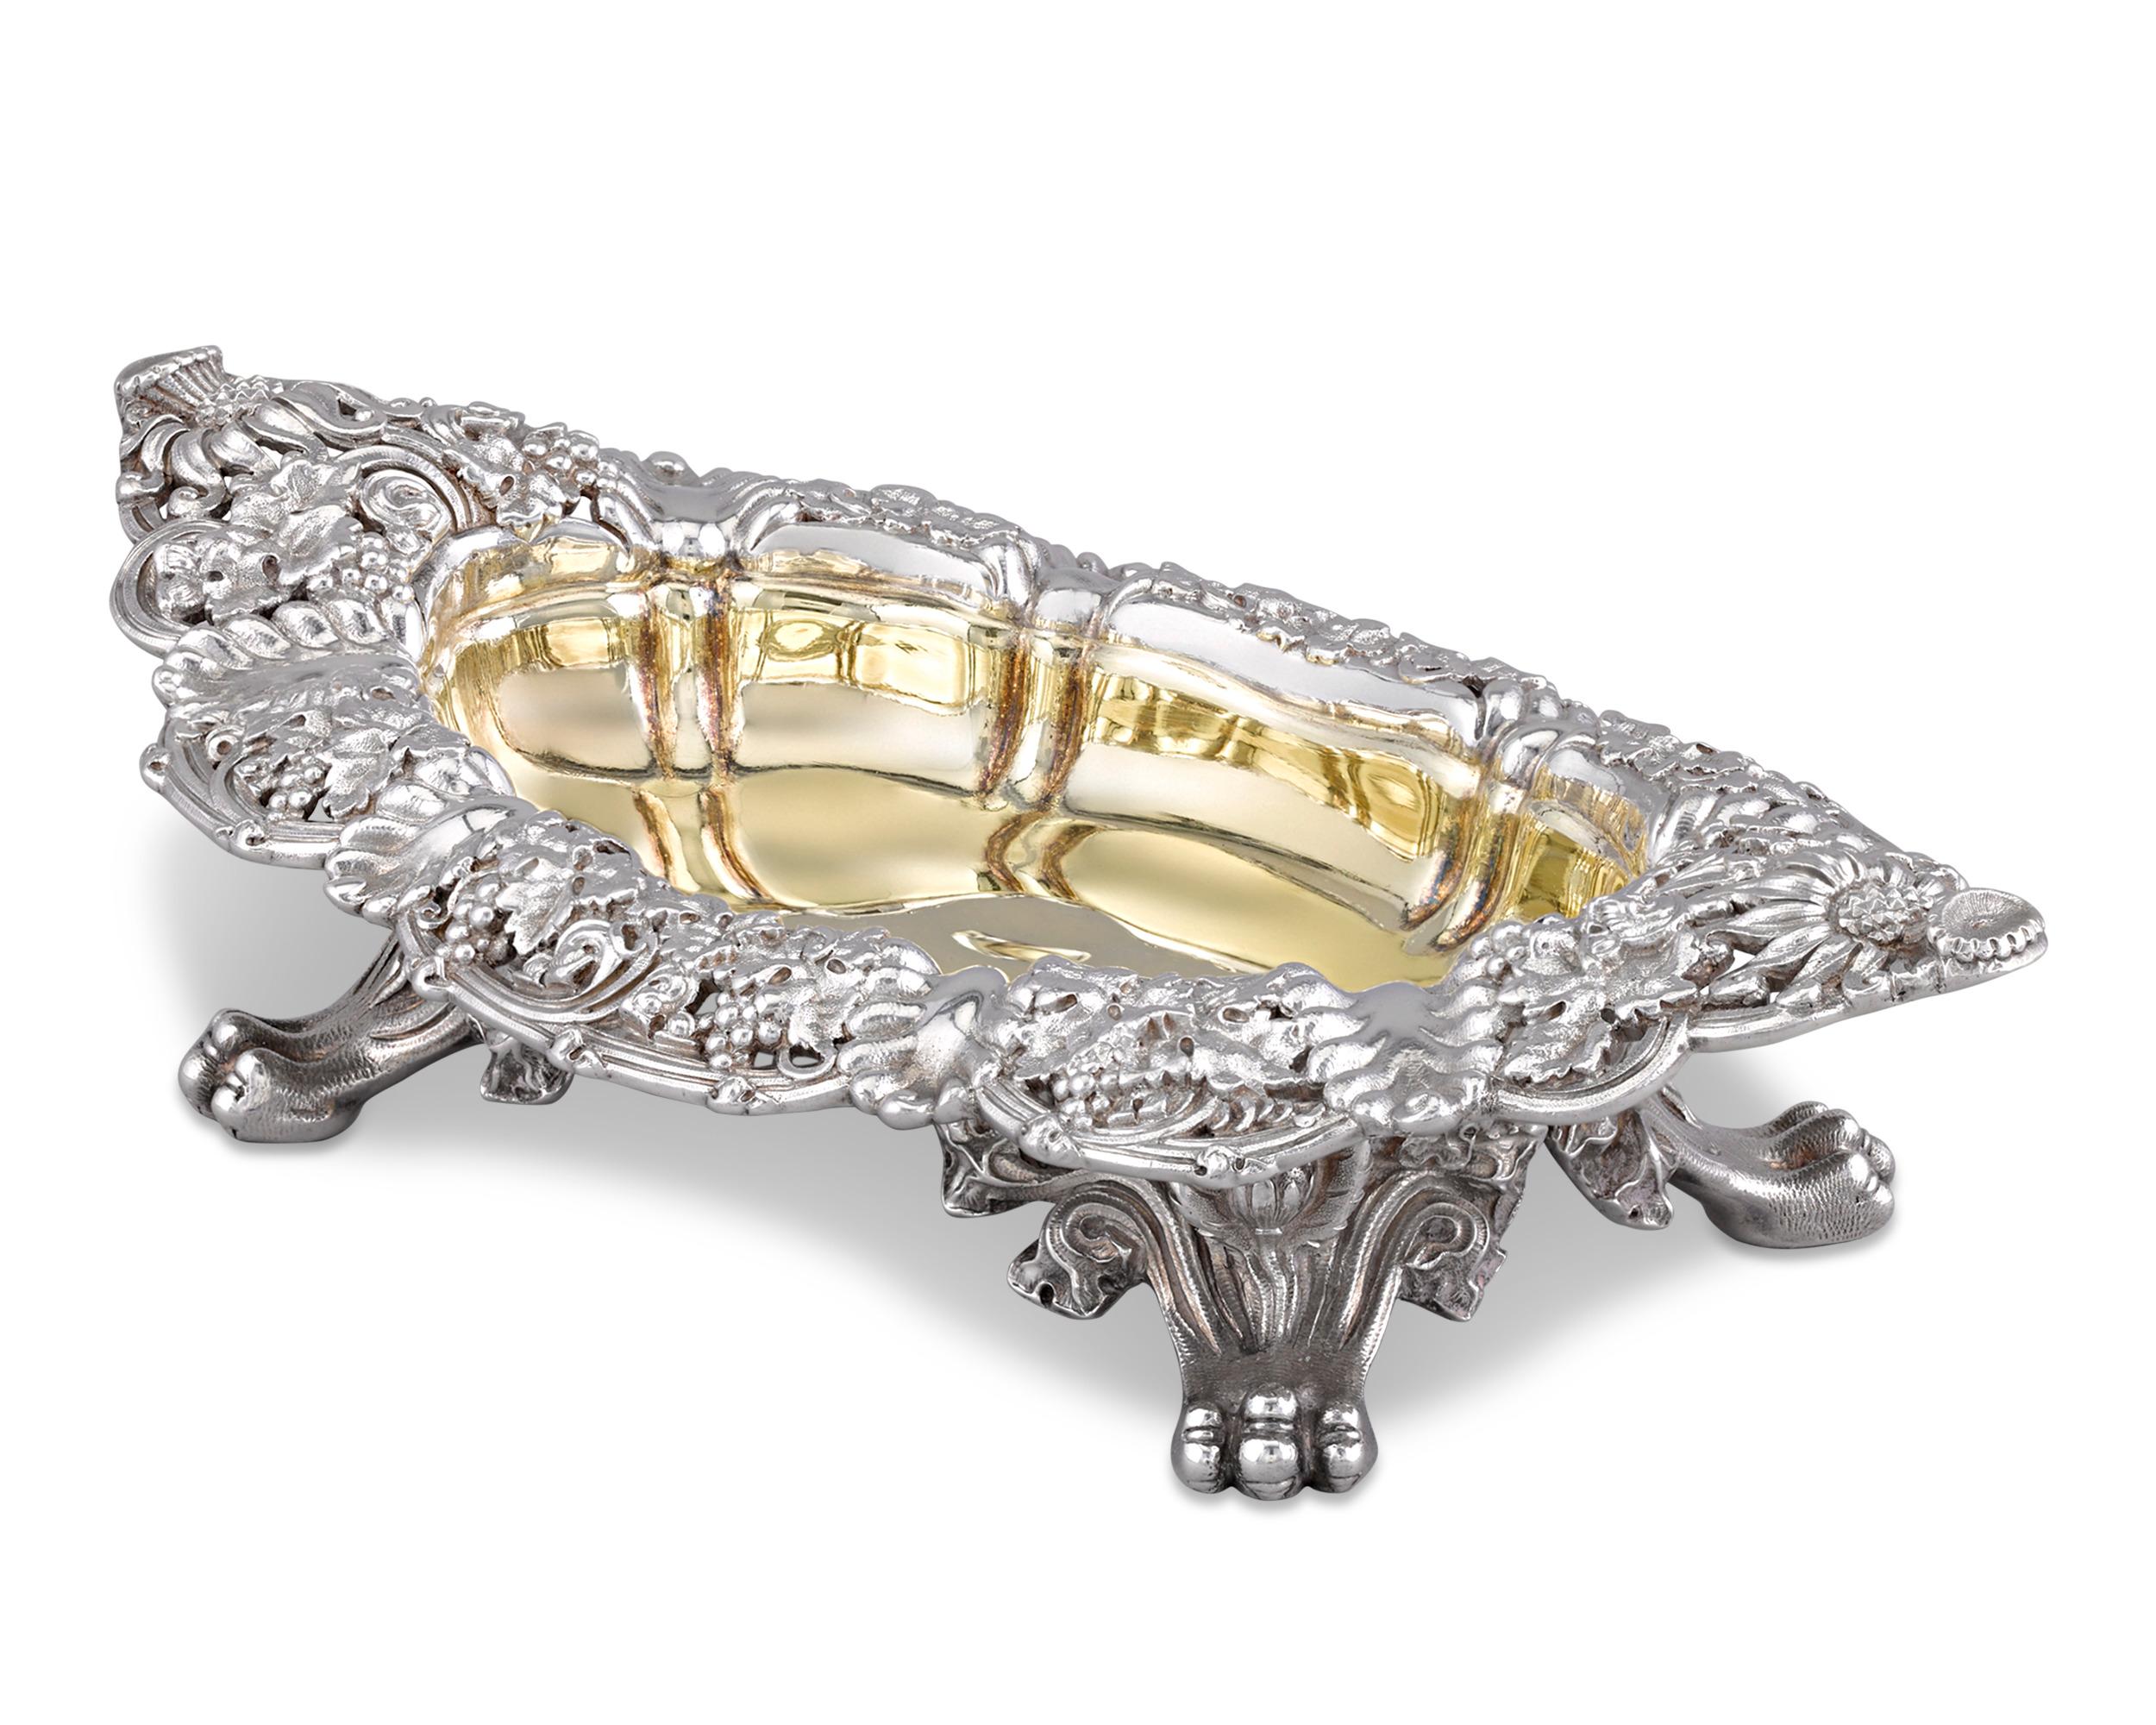 Tiffany & Co. created this beautiful set of four silver salt cellars in a majestic grapevine motif specifically for Mary Frances Hopkins-Searles, the widow of 